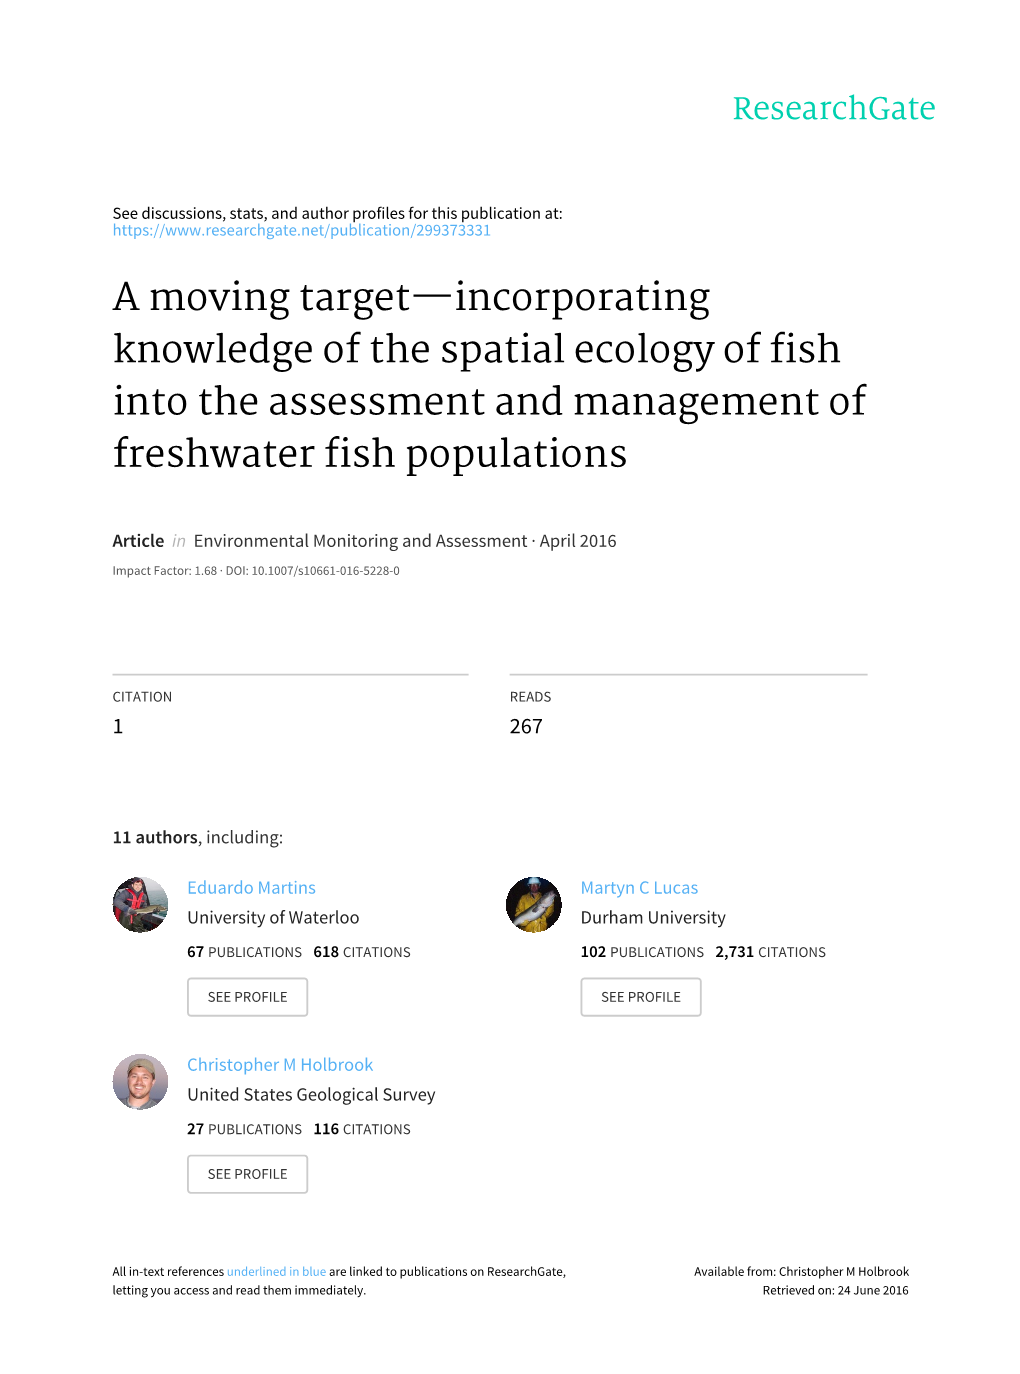 A Moving Target—Incorporating Knowledge of the Spatial Ecology of Fish Into the Assessment and Management of Freshwater Fish Populations